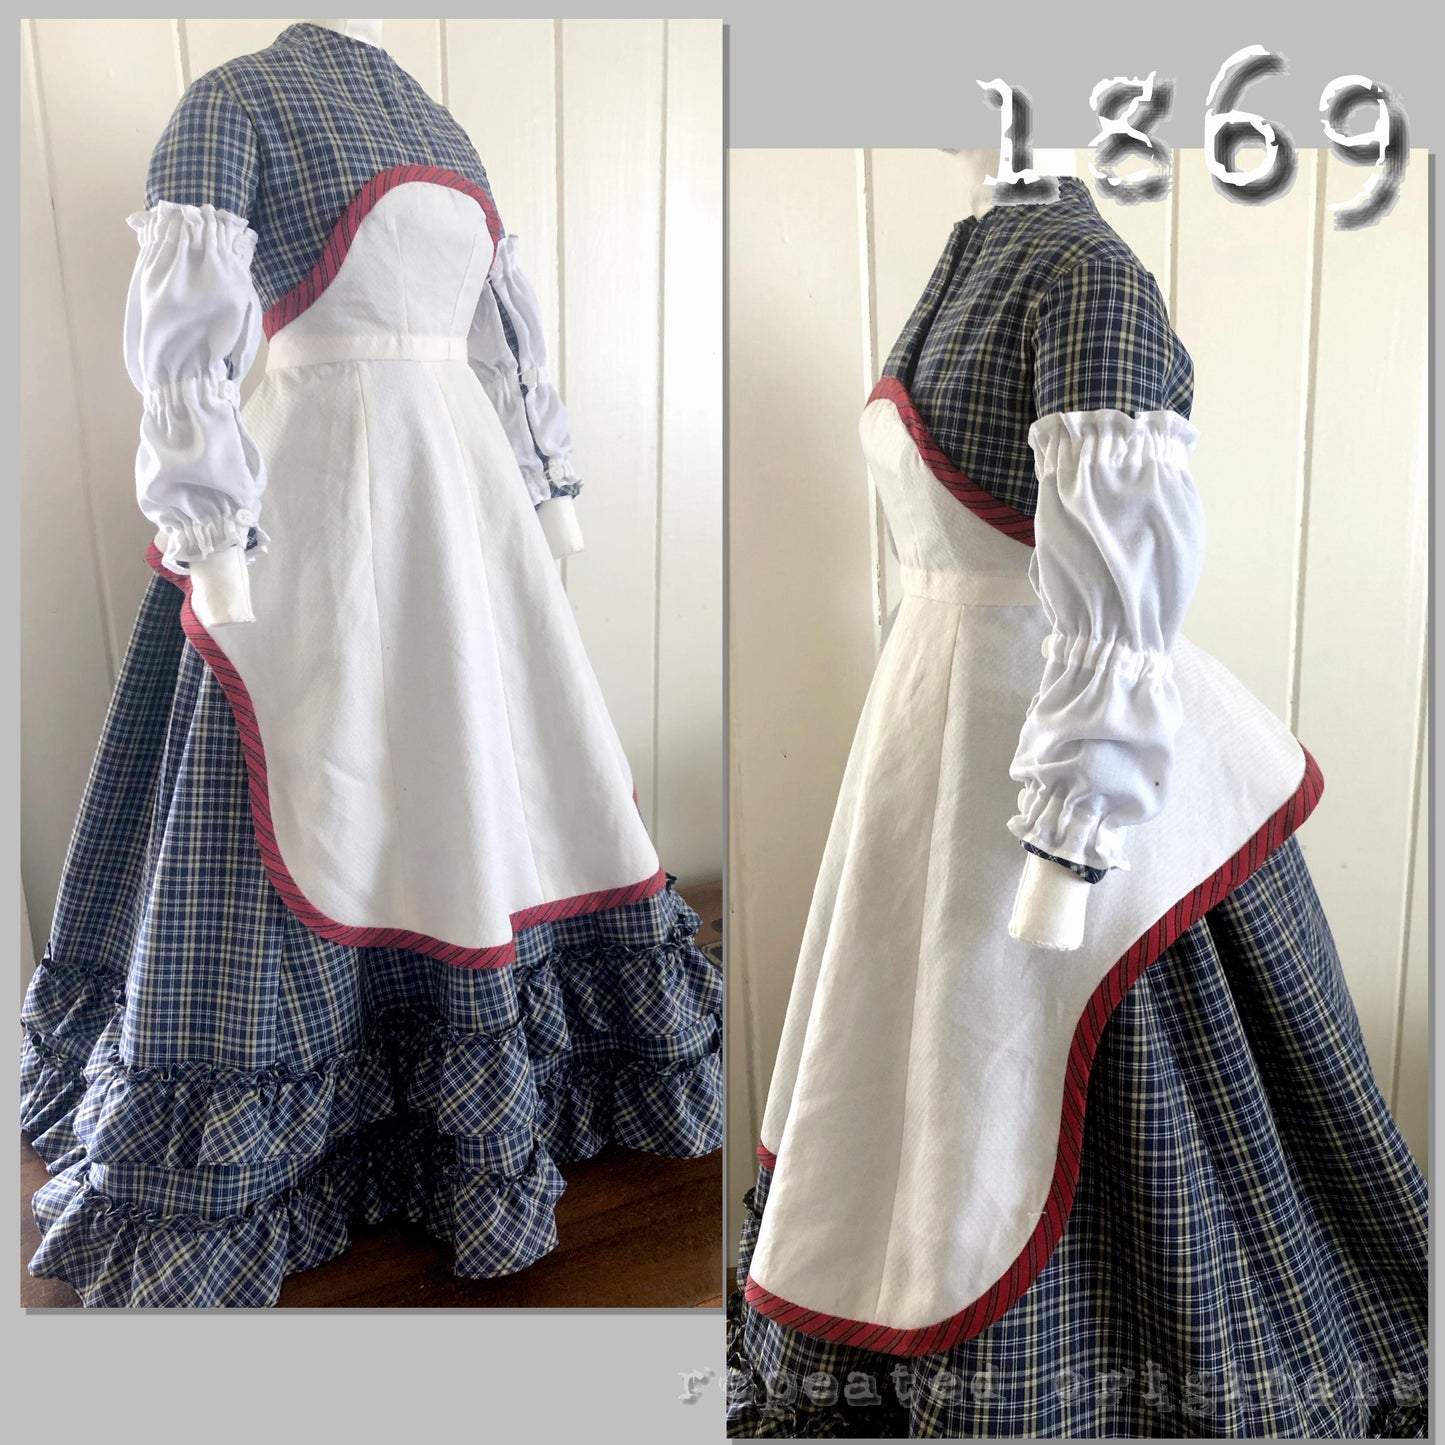 1869 Kitchen Apron and Sleeves Sewing Pattern - INSTANT DOWNLOAD PDF